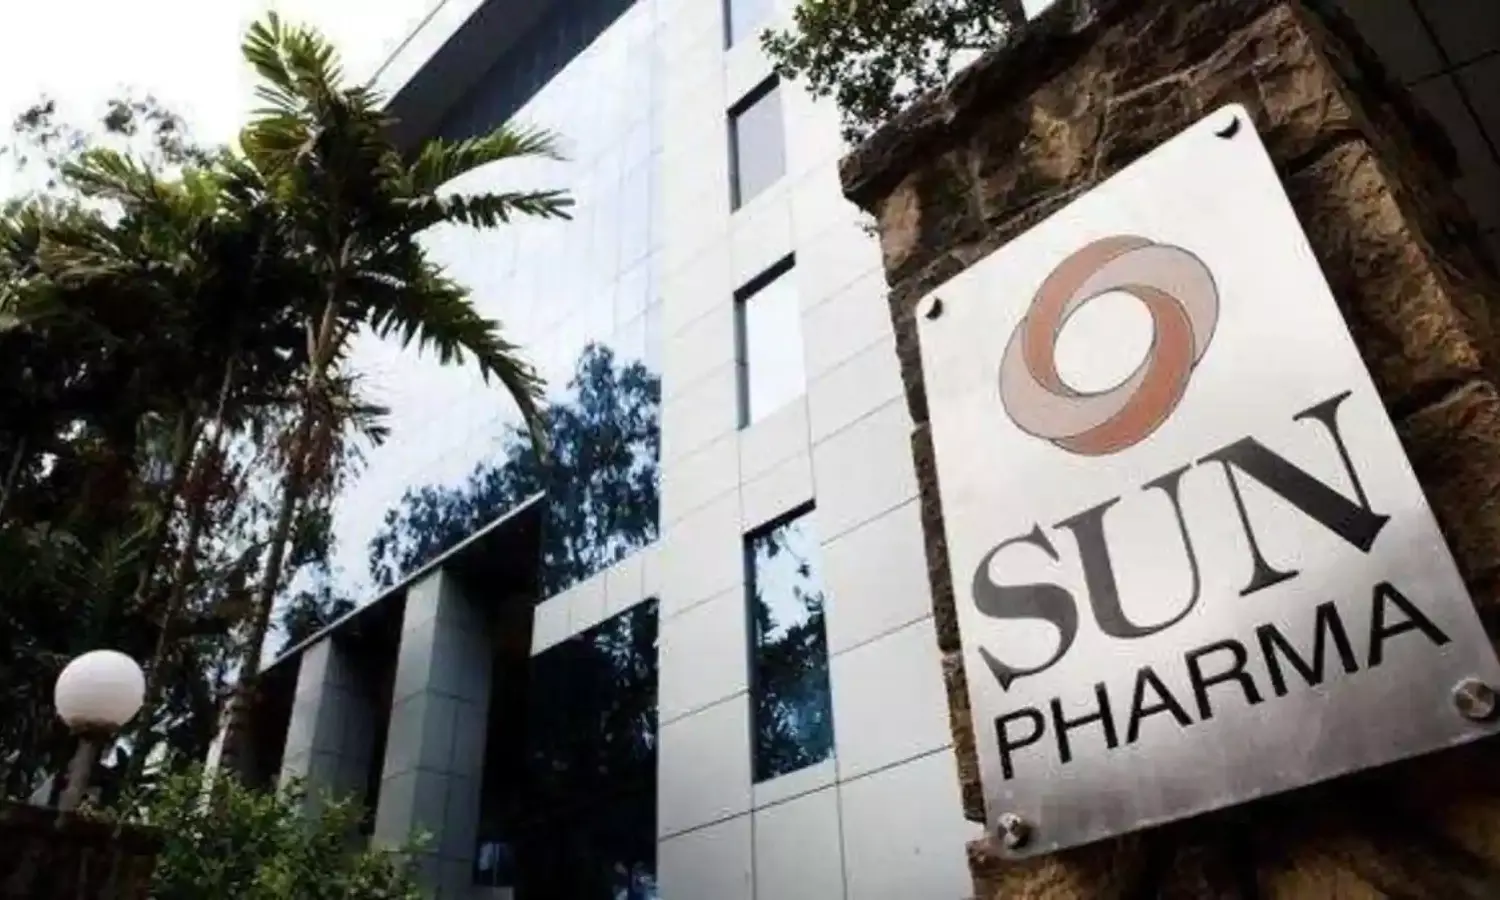 Sun Pharma to market  its own version of Vortioxetine, signs agreement with Lundbeck